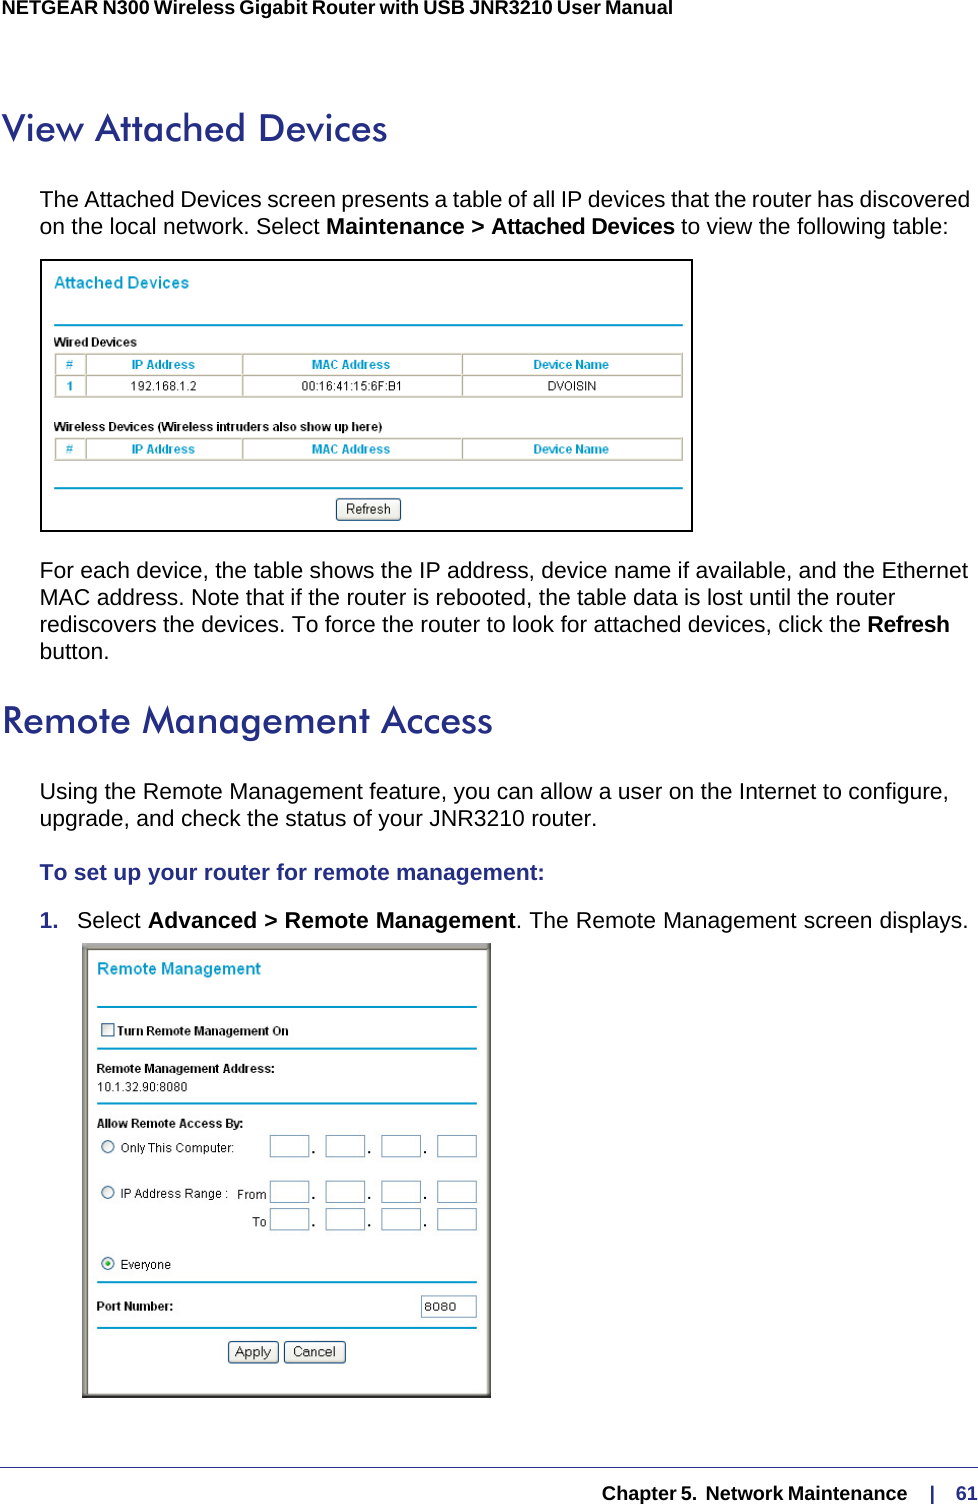   Chapter 5.  Network Maintenance     |    61NETGEAR N300 Wireless Gigabit Router with USB JNR3210 User Manual View Attached DevicesThe Attached Devices screen presents a table of all IP devices that the router has discovered on the local network. Select Maintenance &gt; Attached Devices to view the following table:For each device, the table shows the IP address, device name if available, and the Ethernet MAC address. Note that if the router is rebooted, the table data is lost until the router rediscovers the devices. To force the router to look for attached devices, click the Refresh button.Remote Management AccessUsing the Remote Management feature, you can allow a user on the Internet to configure, upgrade, and check the status of your JNR3210 router. To set up your router for remote management:1.  Select Advanced &gt; Remote Management. The Remote Management screen displays. 